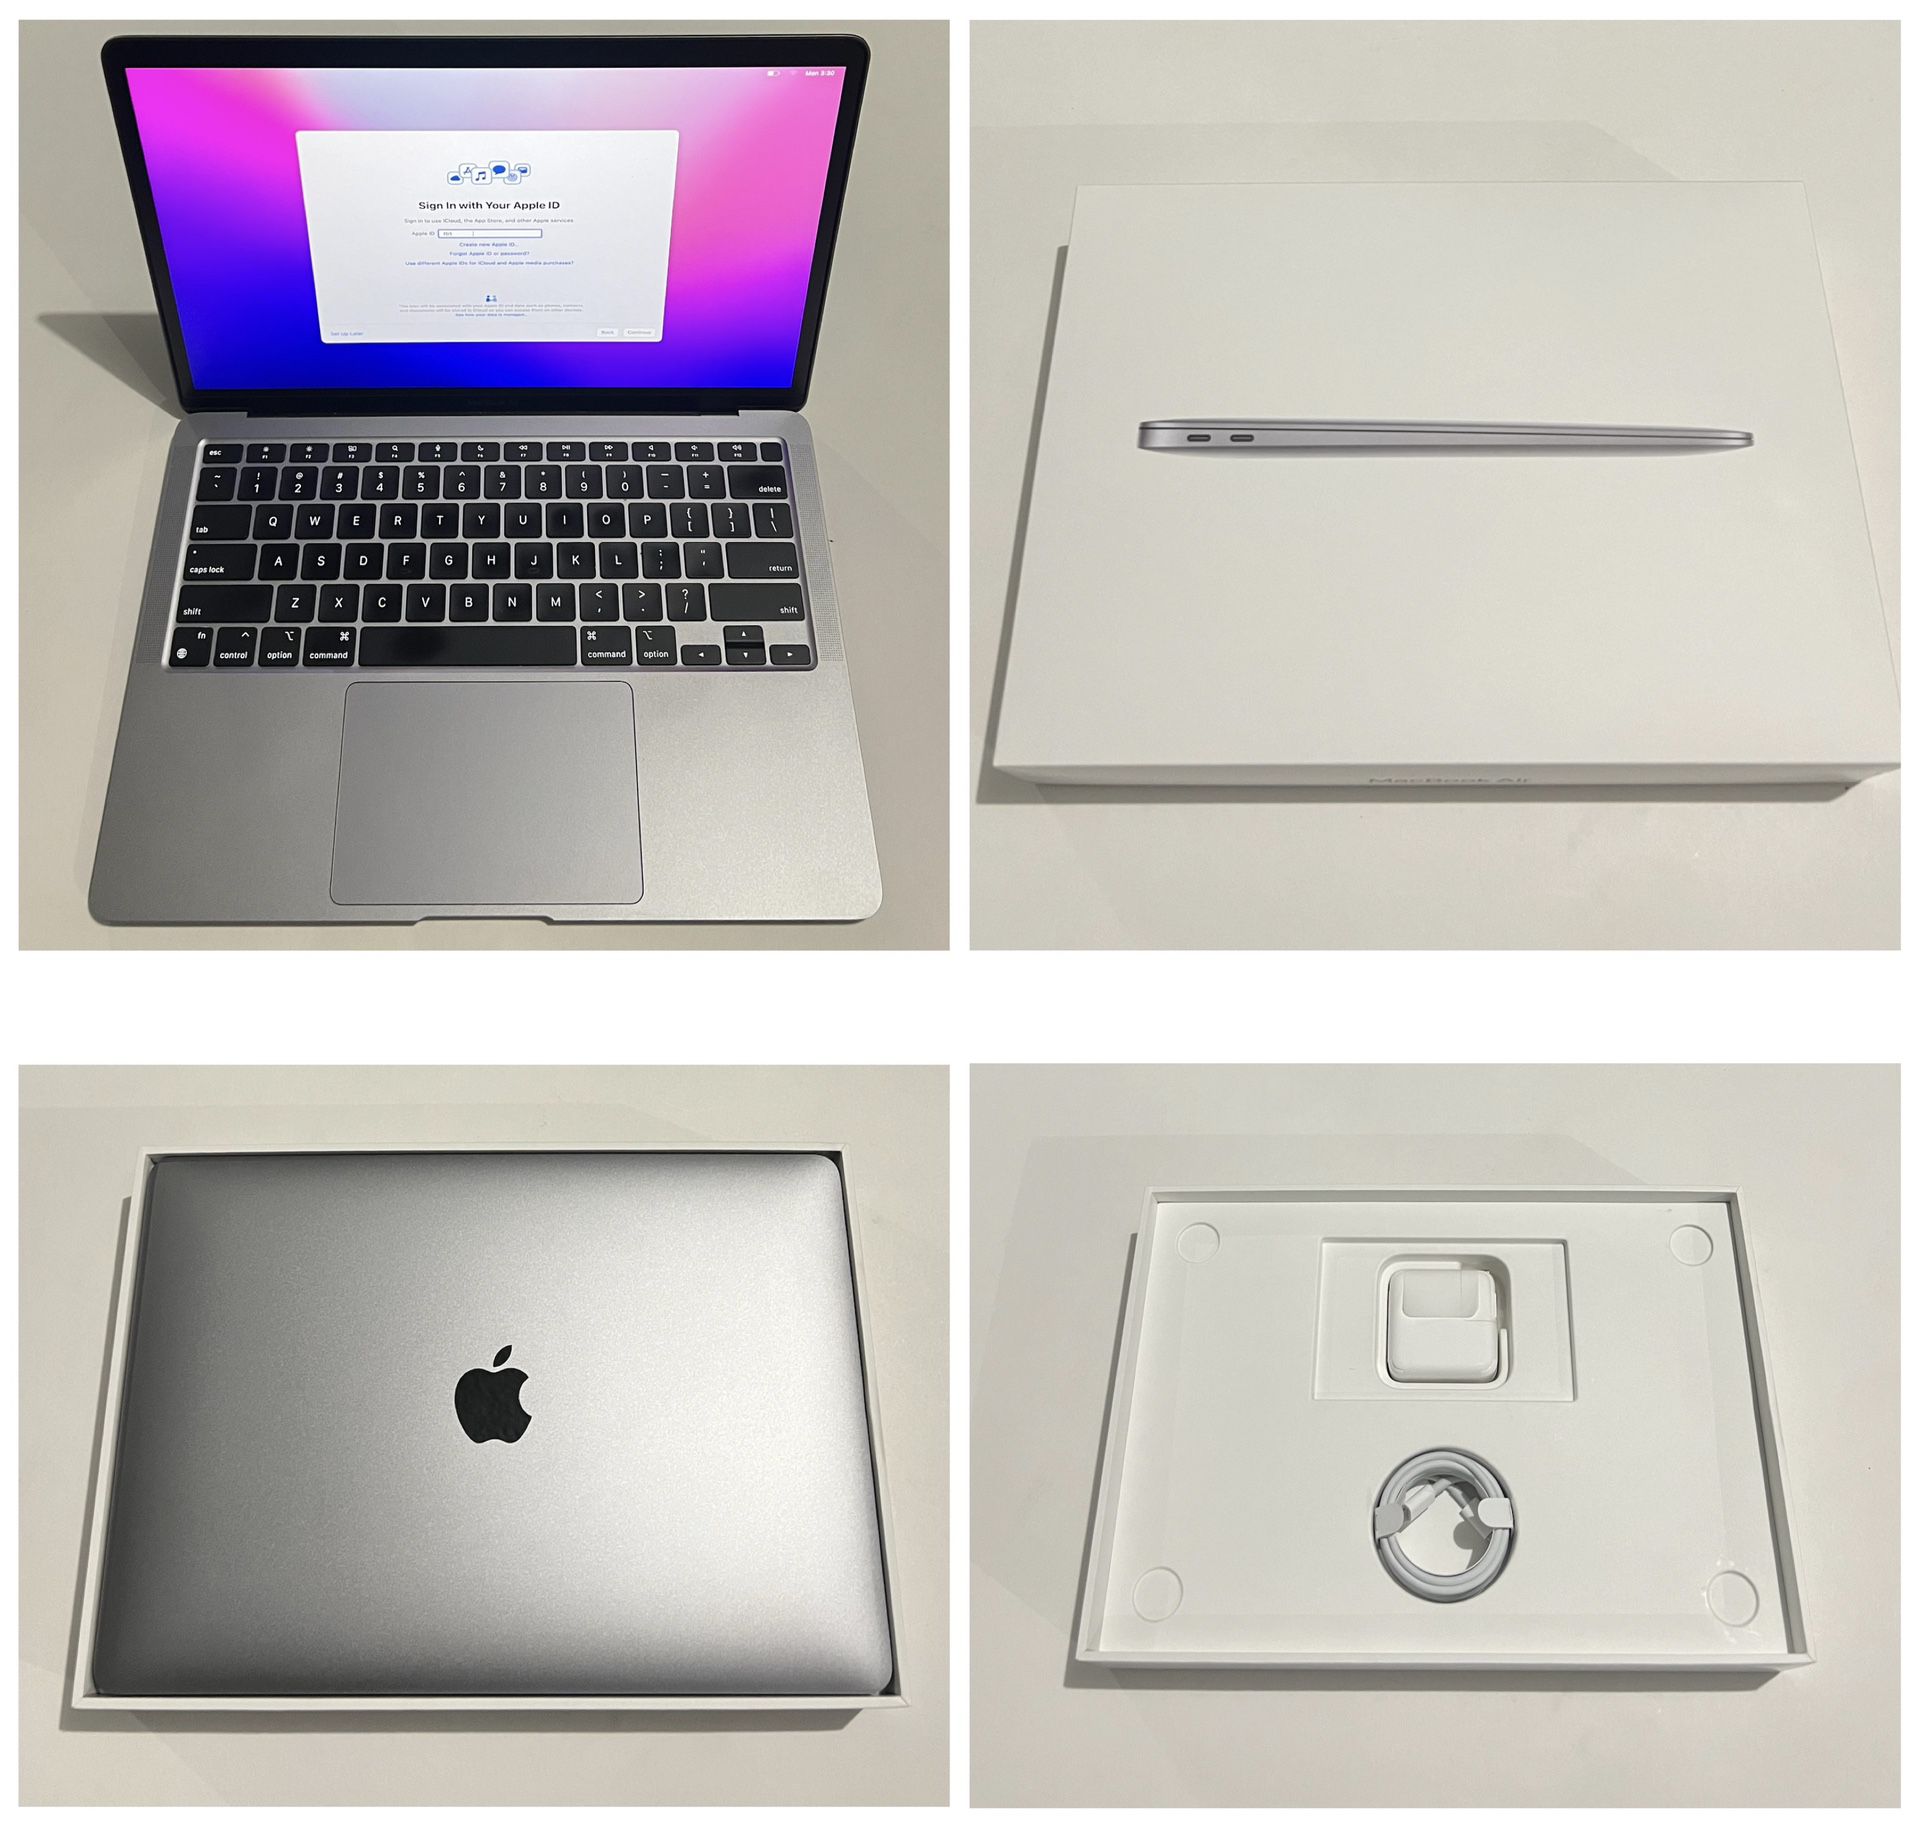 Apple MacBook Air 13.3 inch Laptop - Space Gray, M1 Chip, 8GB RAM, 256GB storage. (2020) model in great condition. $550